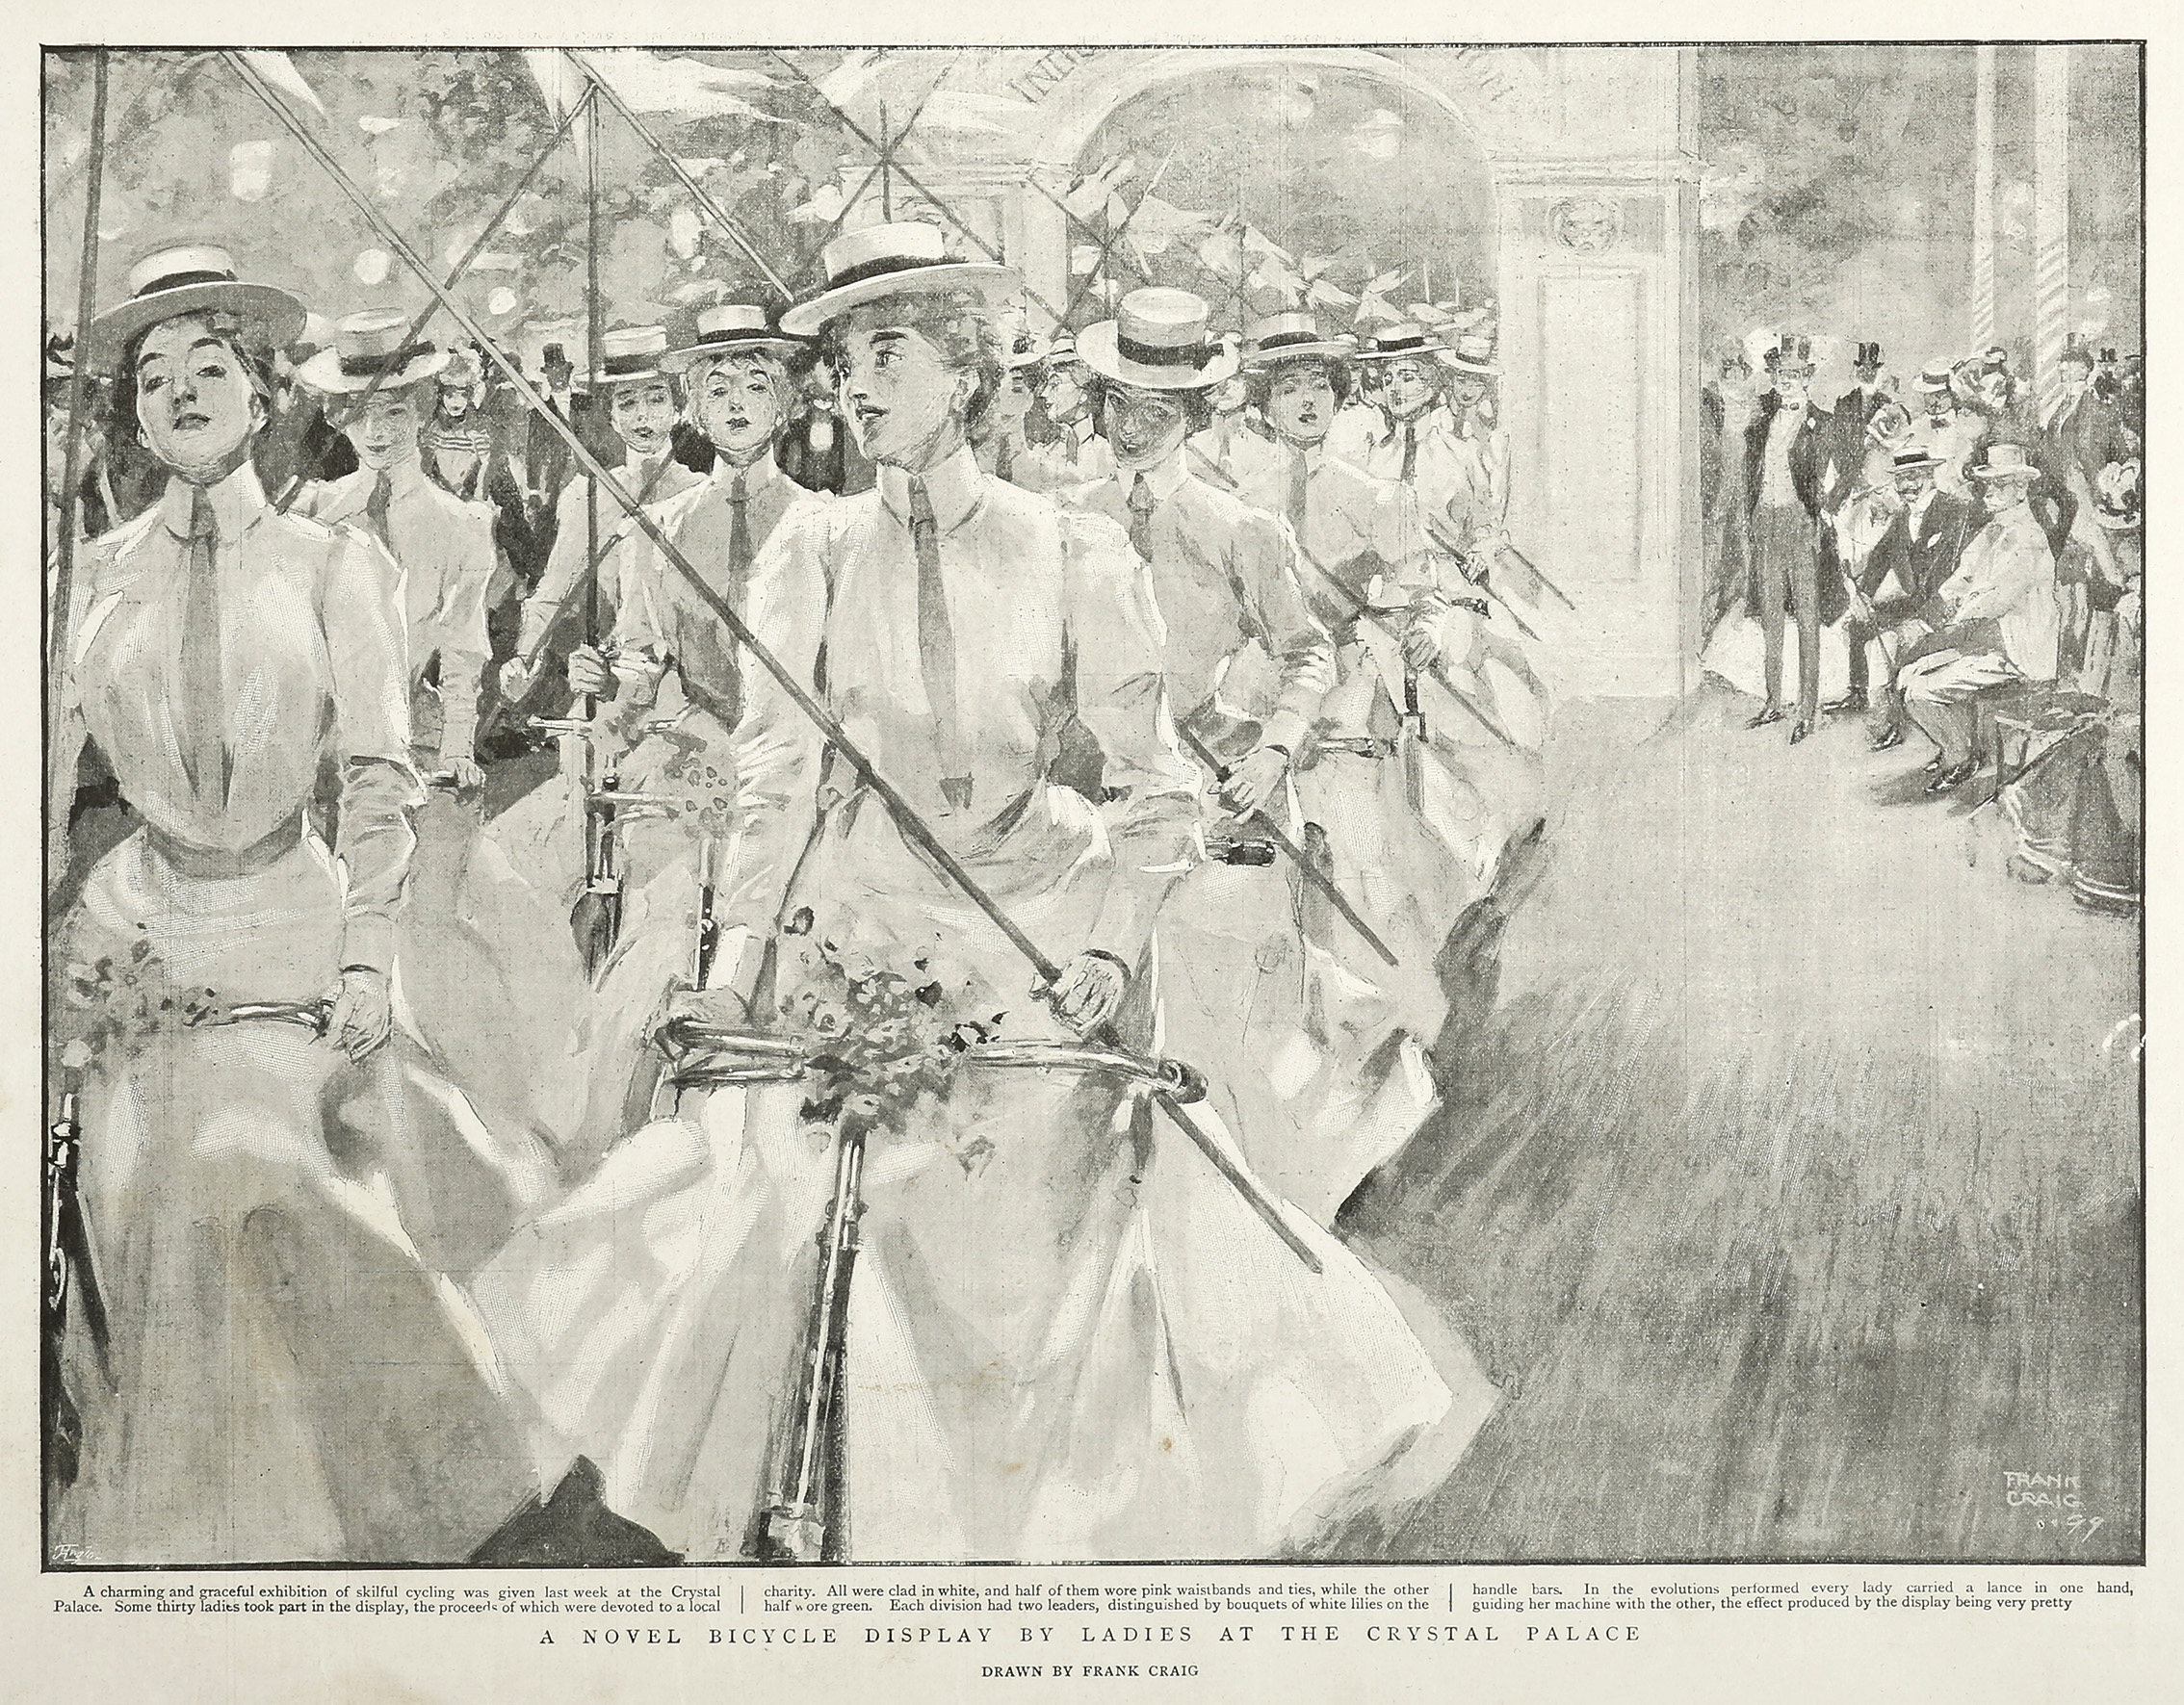 A Novel Display by Ladies at the Crystal Palace. - Antique Print from 1899